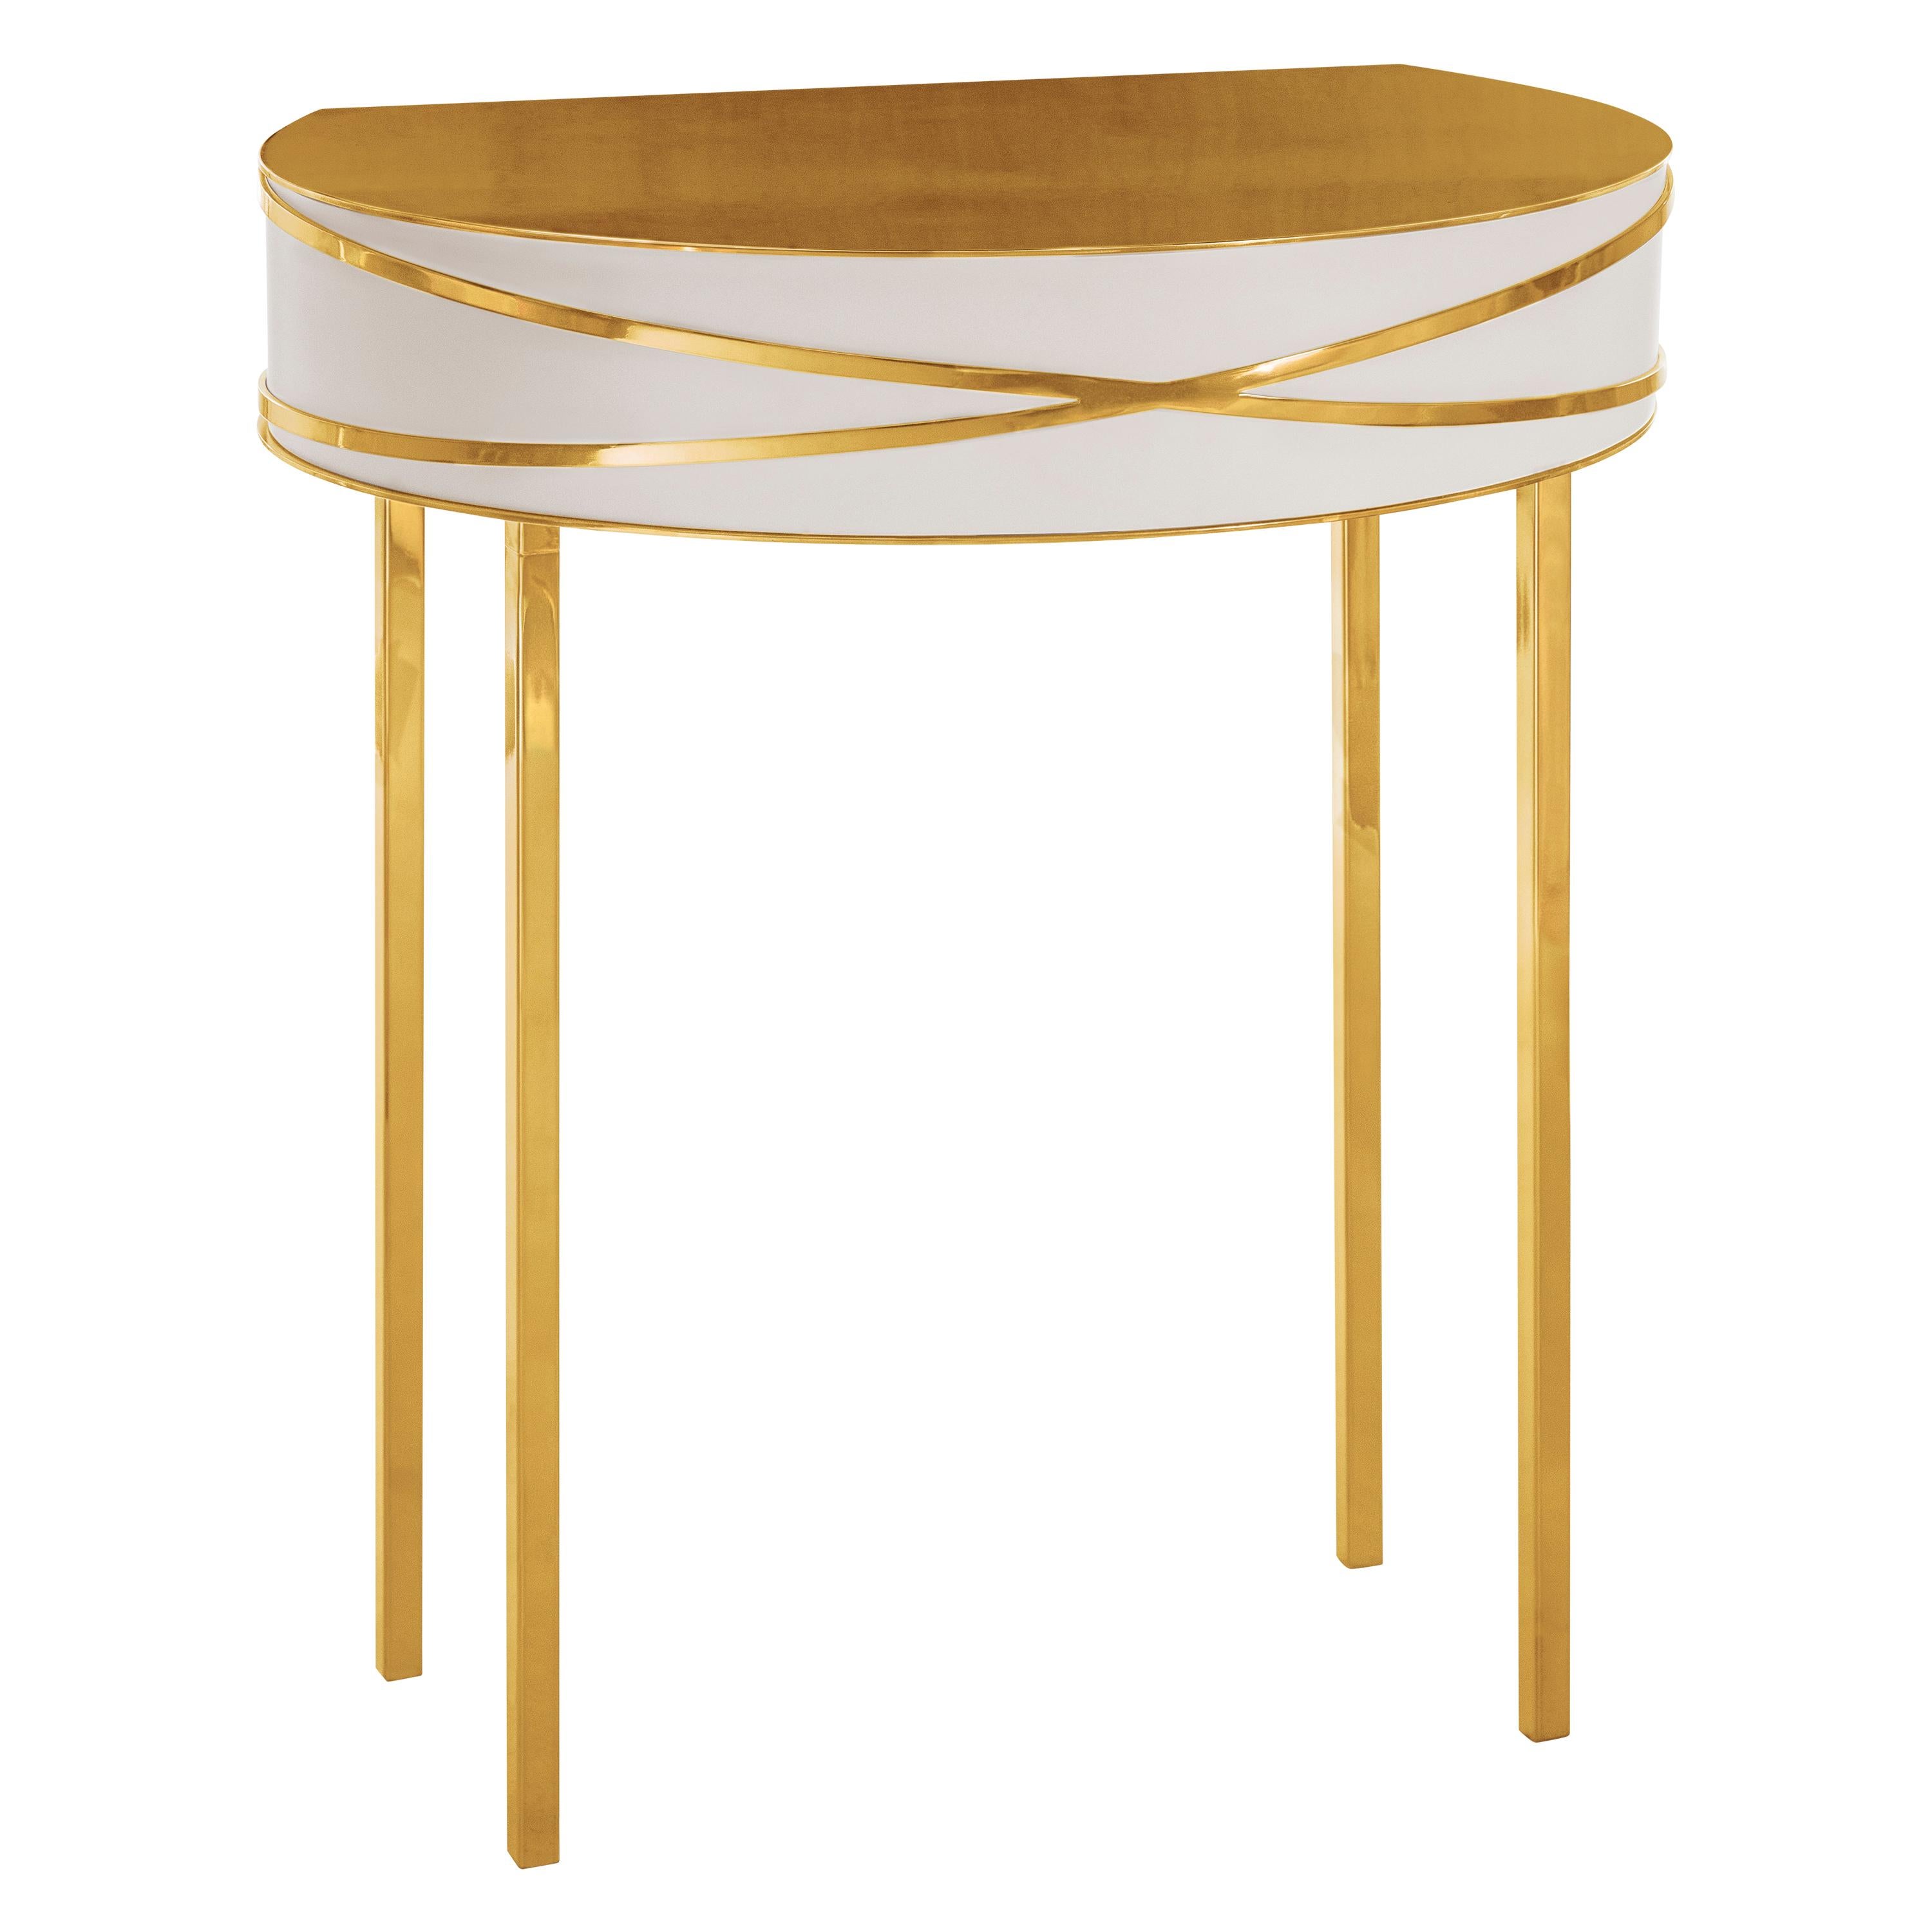 Stella Gray Console or Bedside Table with Gold Trims by Nika Zupanc